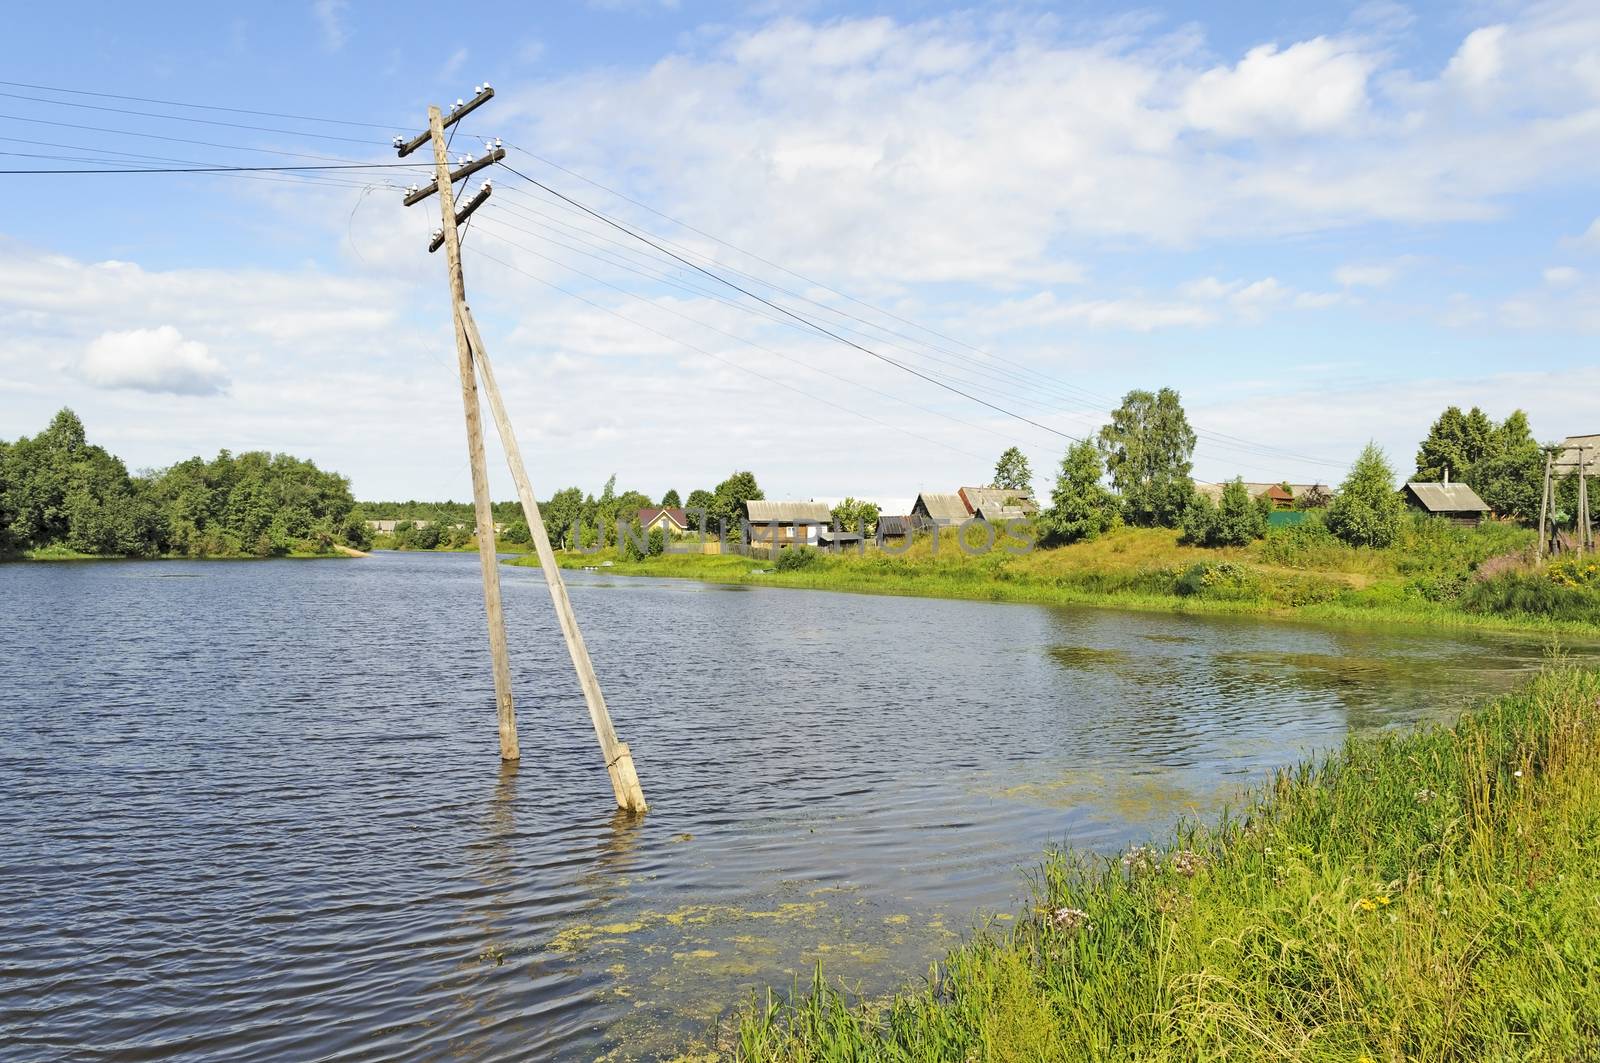 Electric pole in water during a river flood. Country landscape